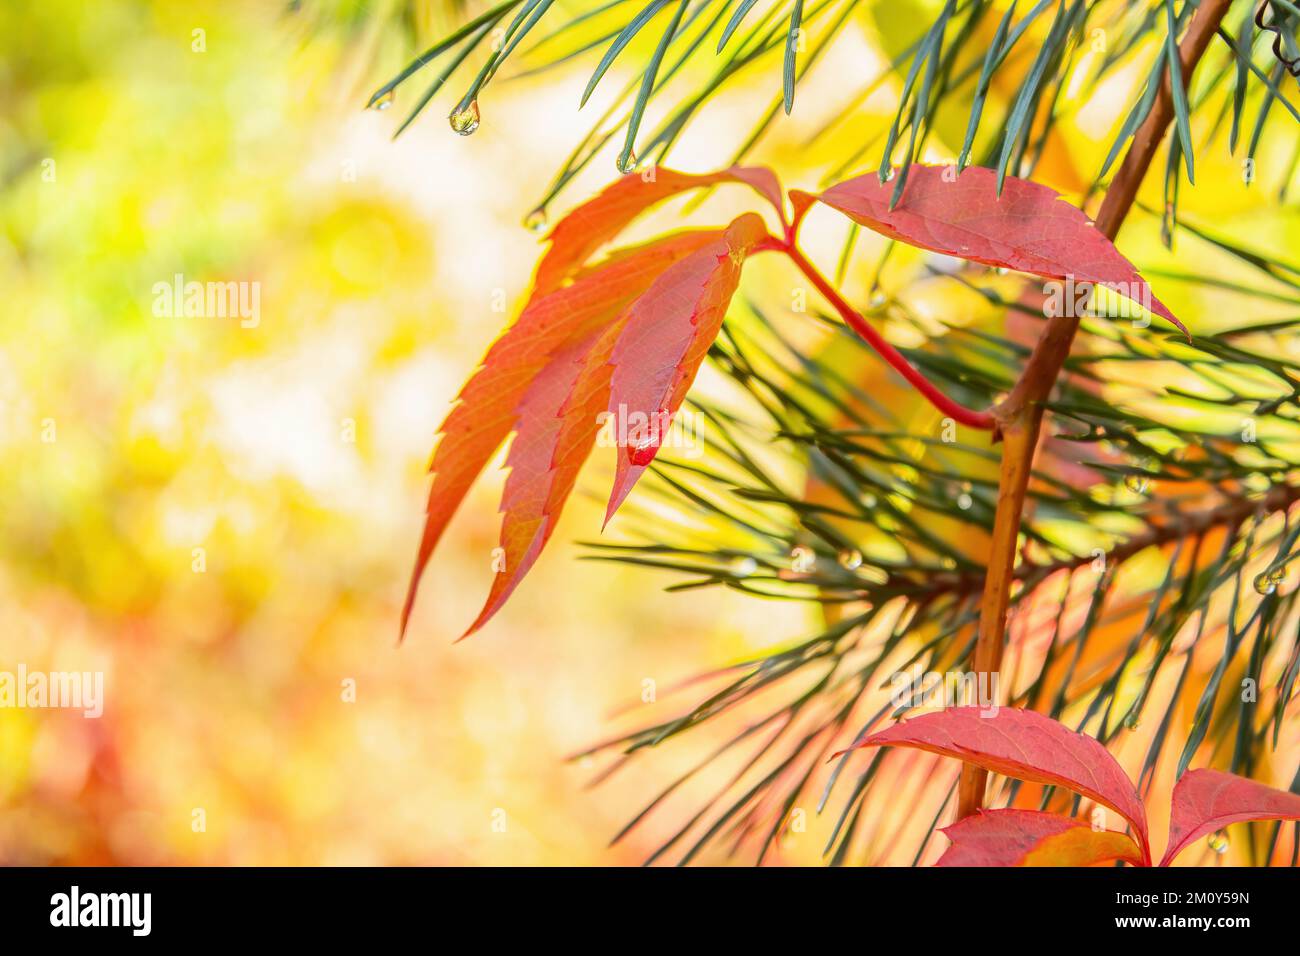 Autumn red leaf of creeper. Virginia creeper on a yellow background with pine spikes. Stock Photo